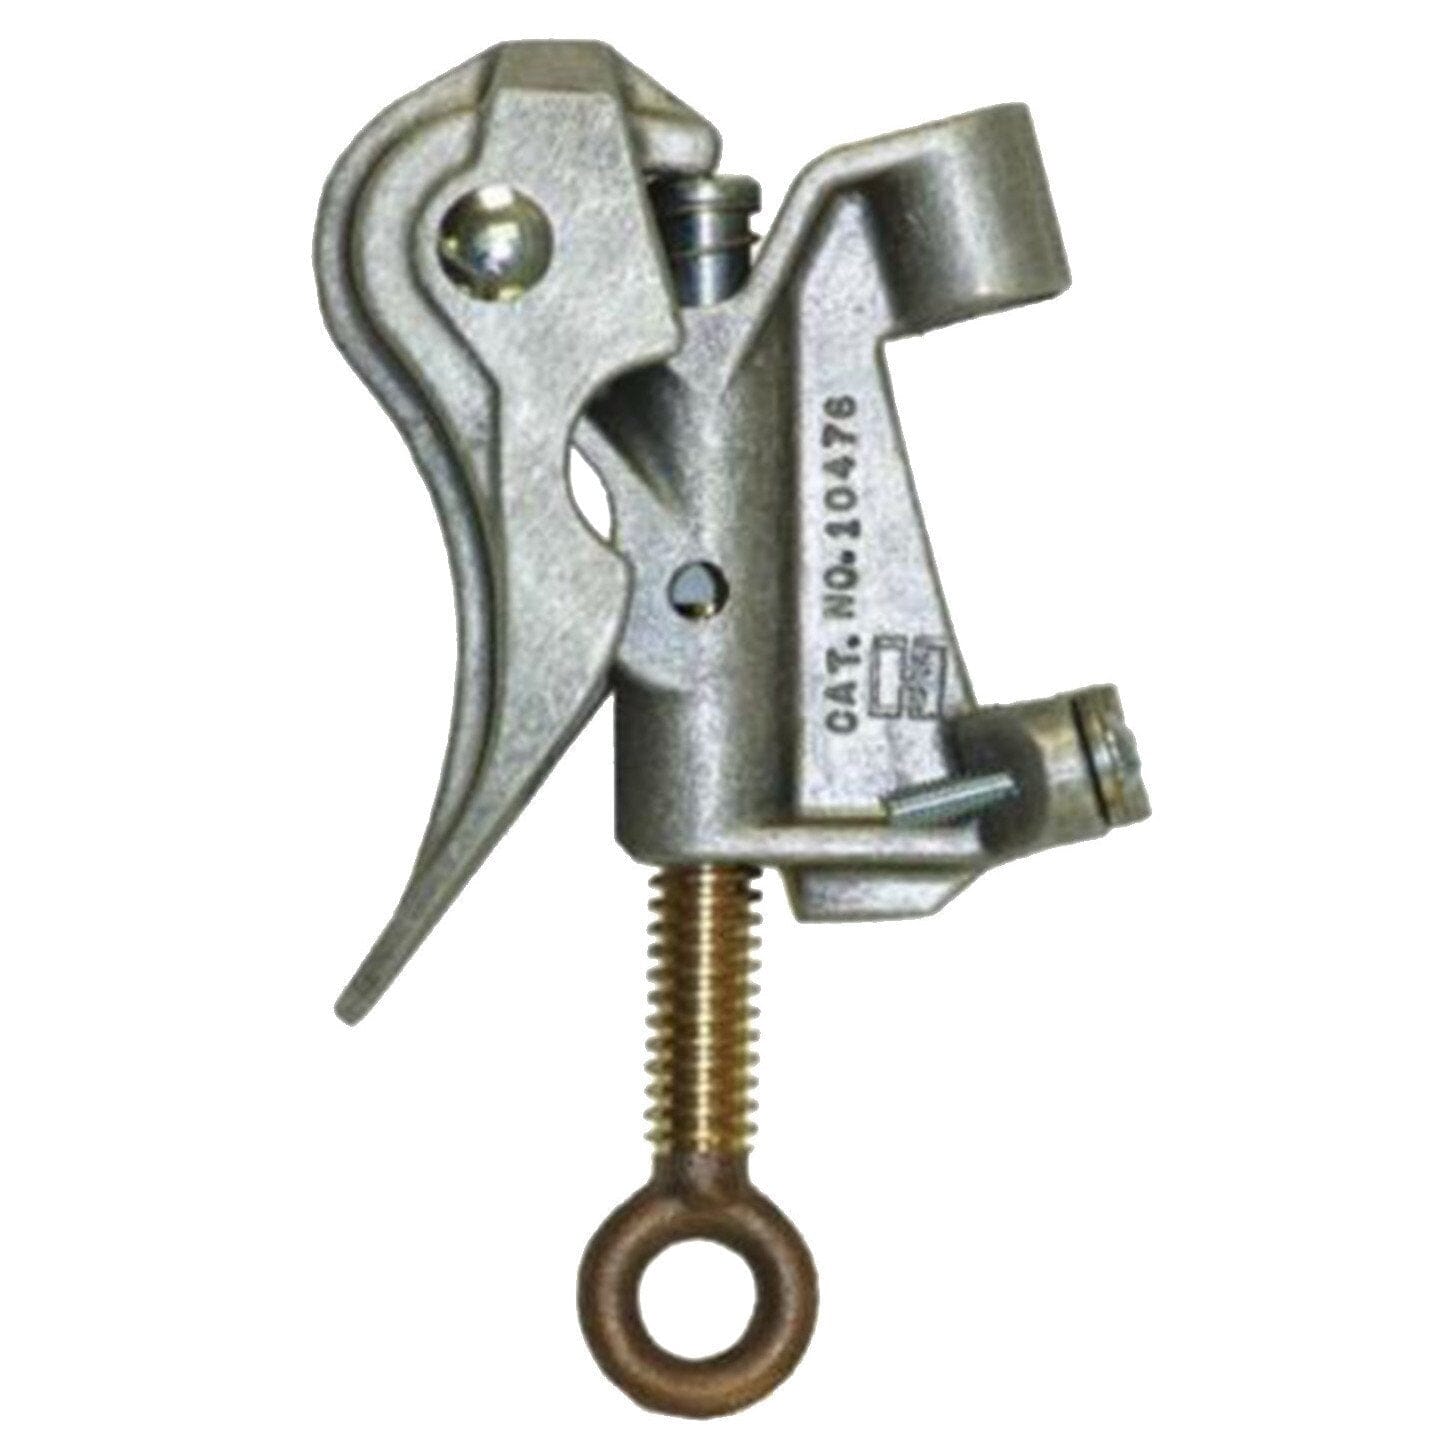 Hastings Duckbill Ground Clamp, Smooth Jaws, Threaded Terminal - 10476